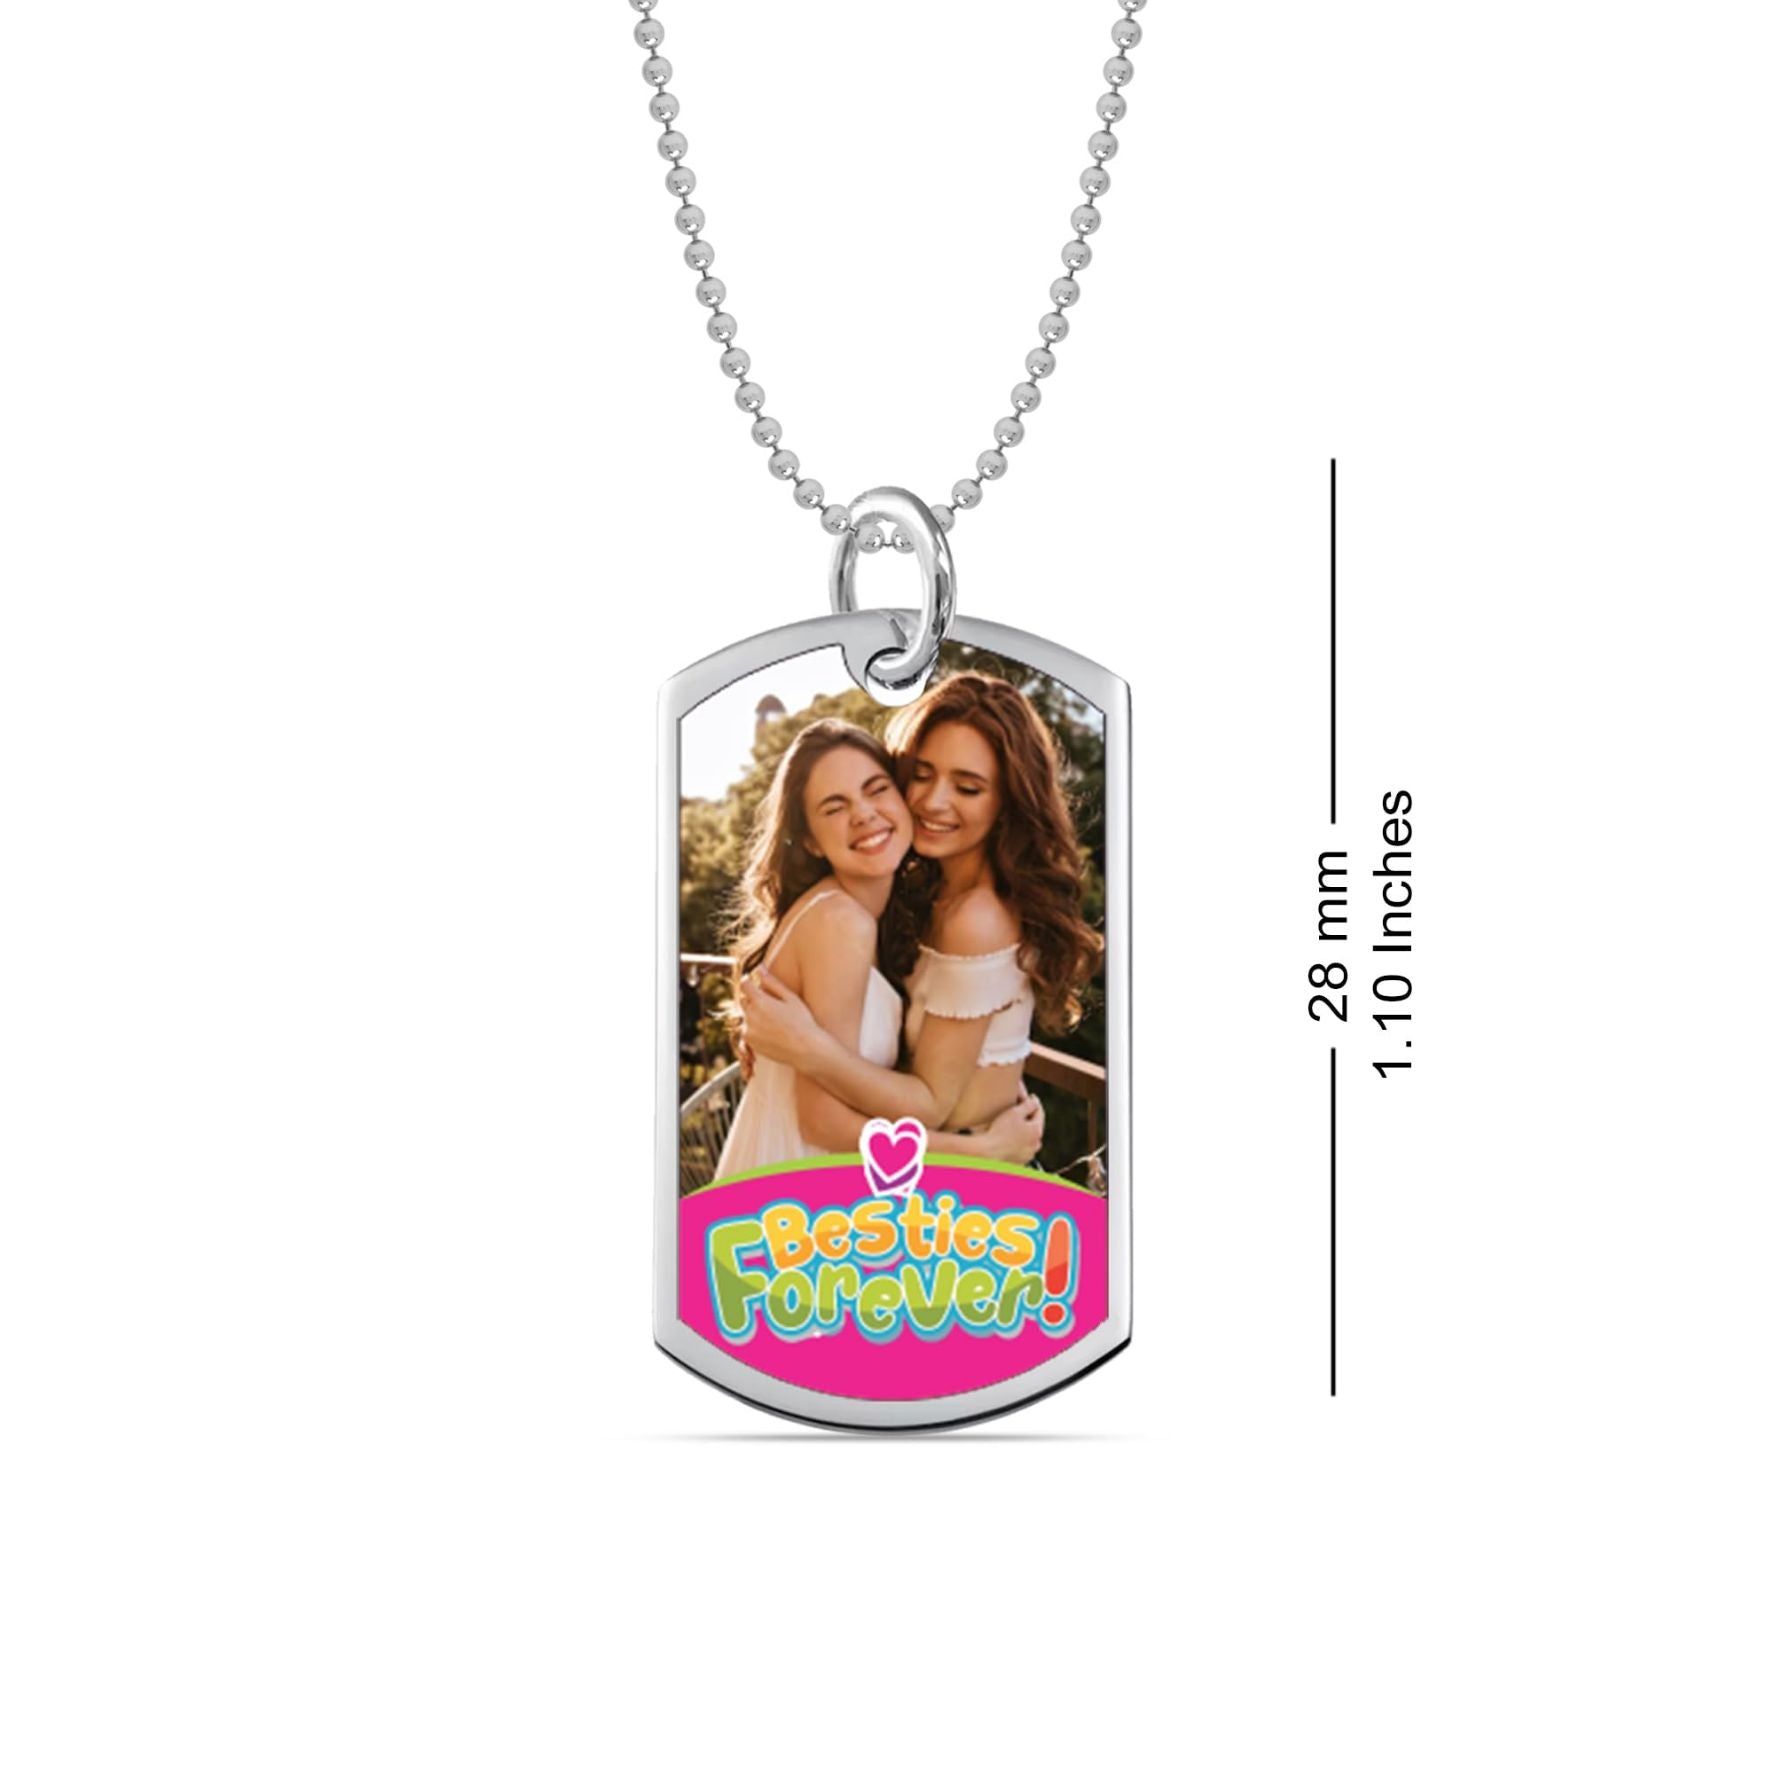 Personalised 925 Sterling Silver Custom Text Message with Image Engraved Besties Forever Pendant Necklace for Girls and Women